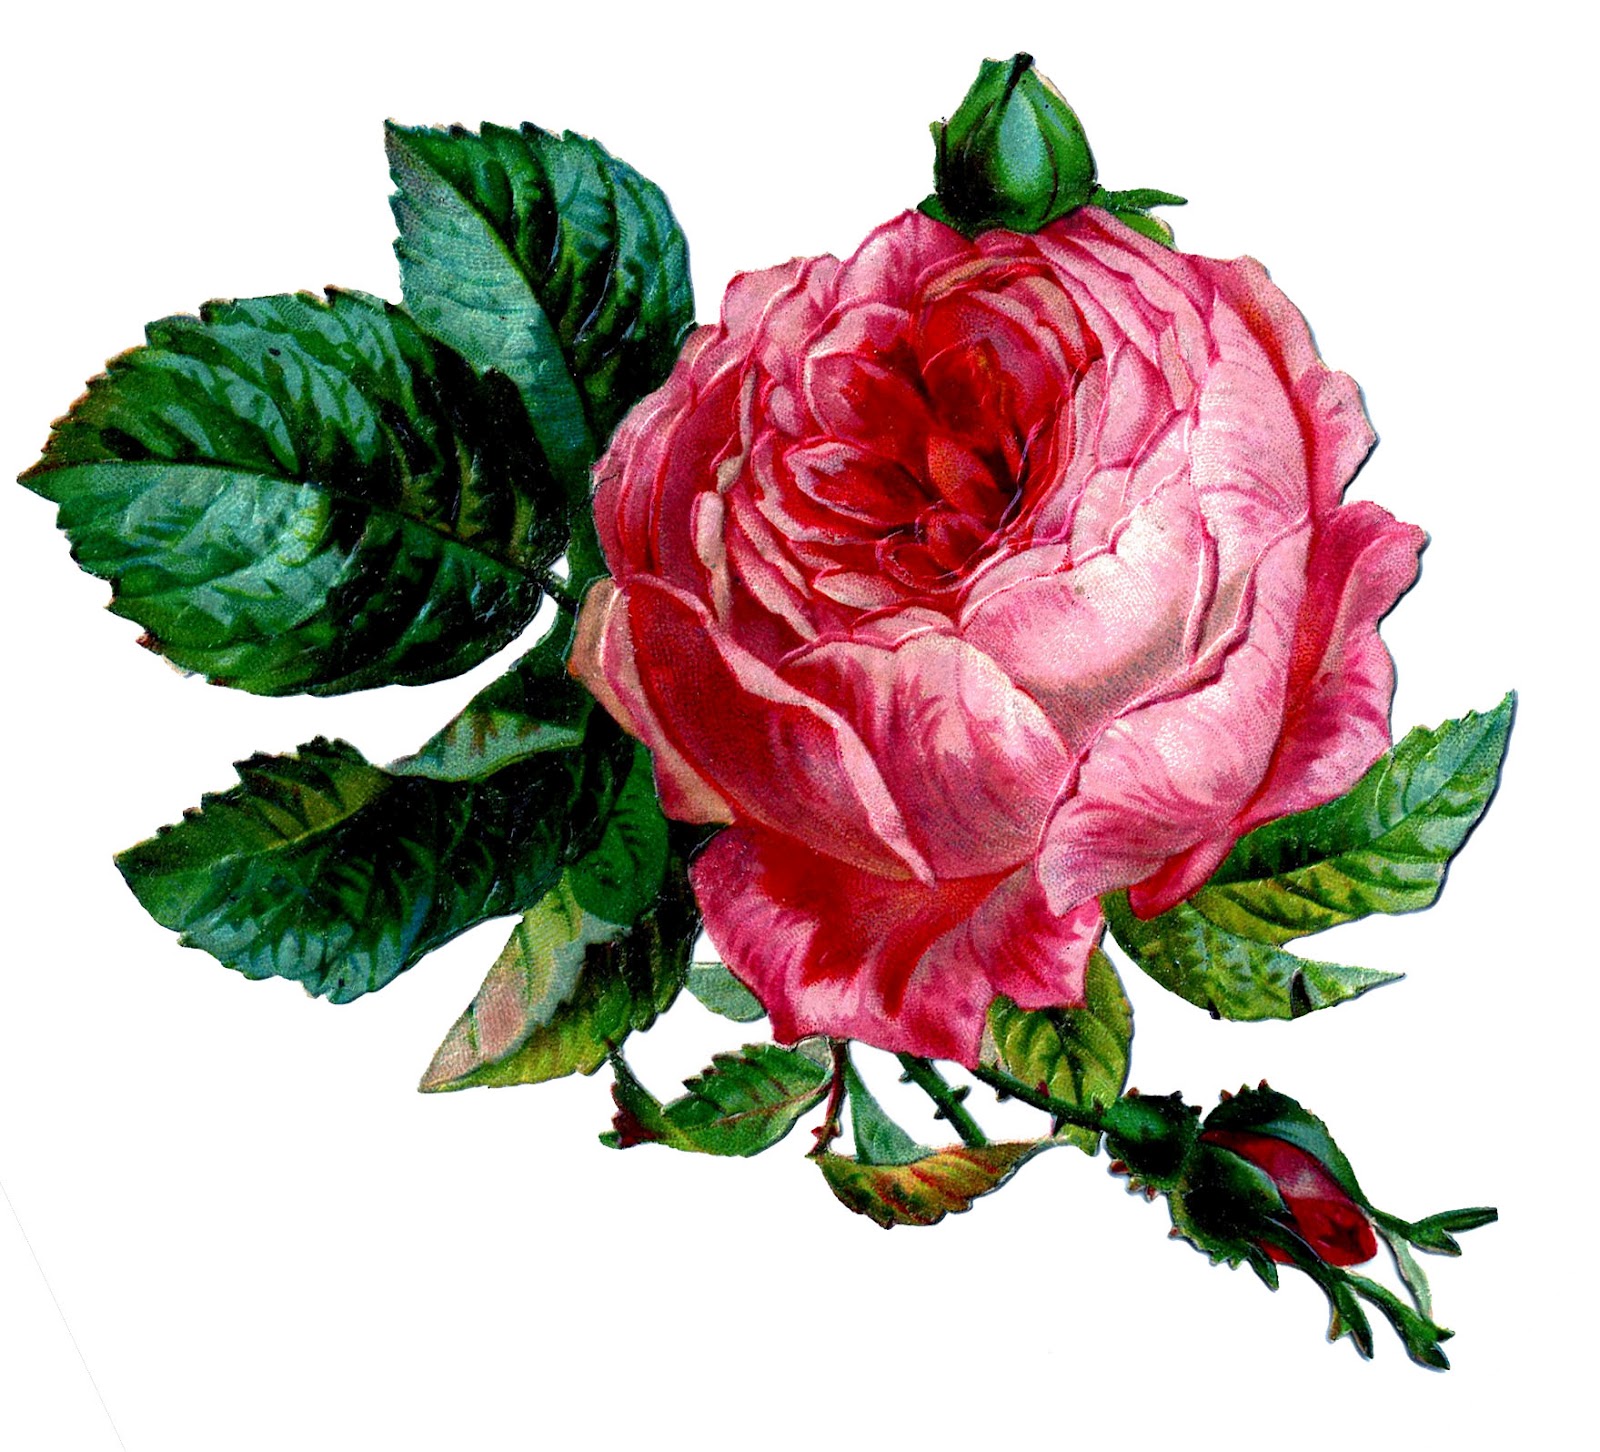 roses clip art free download - photo #40